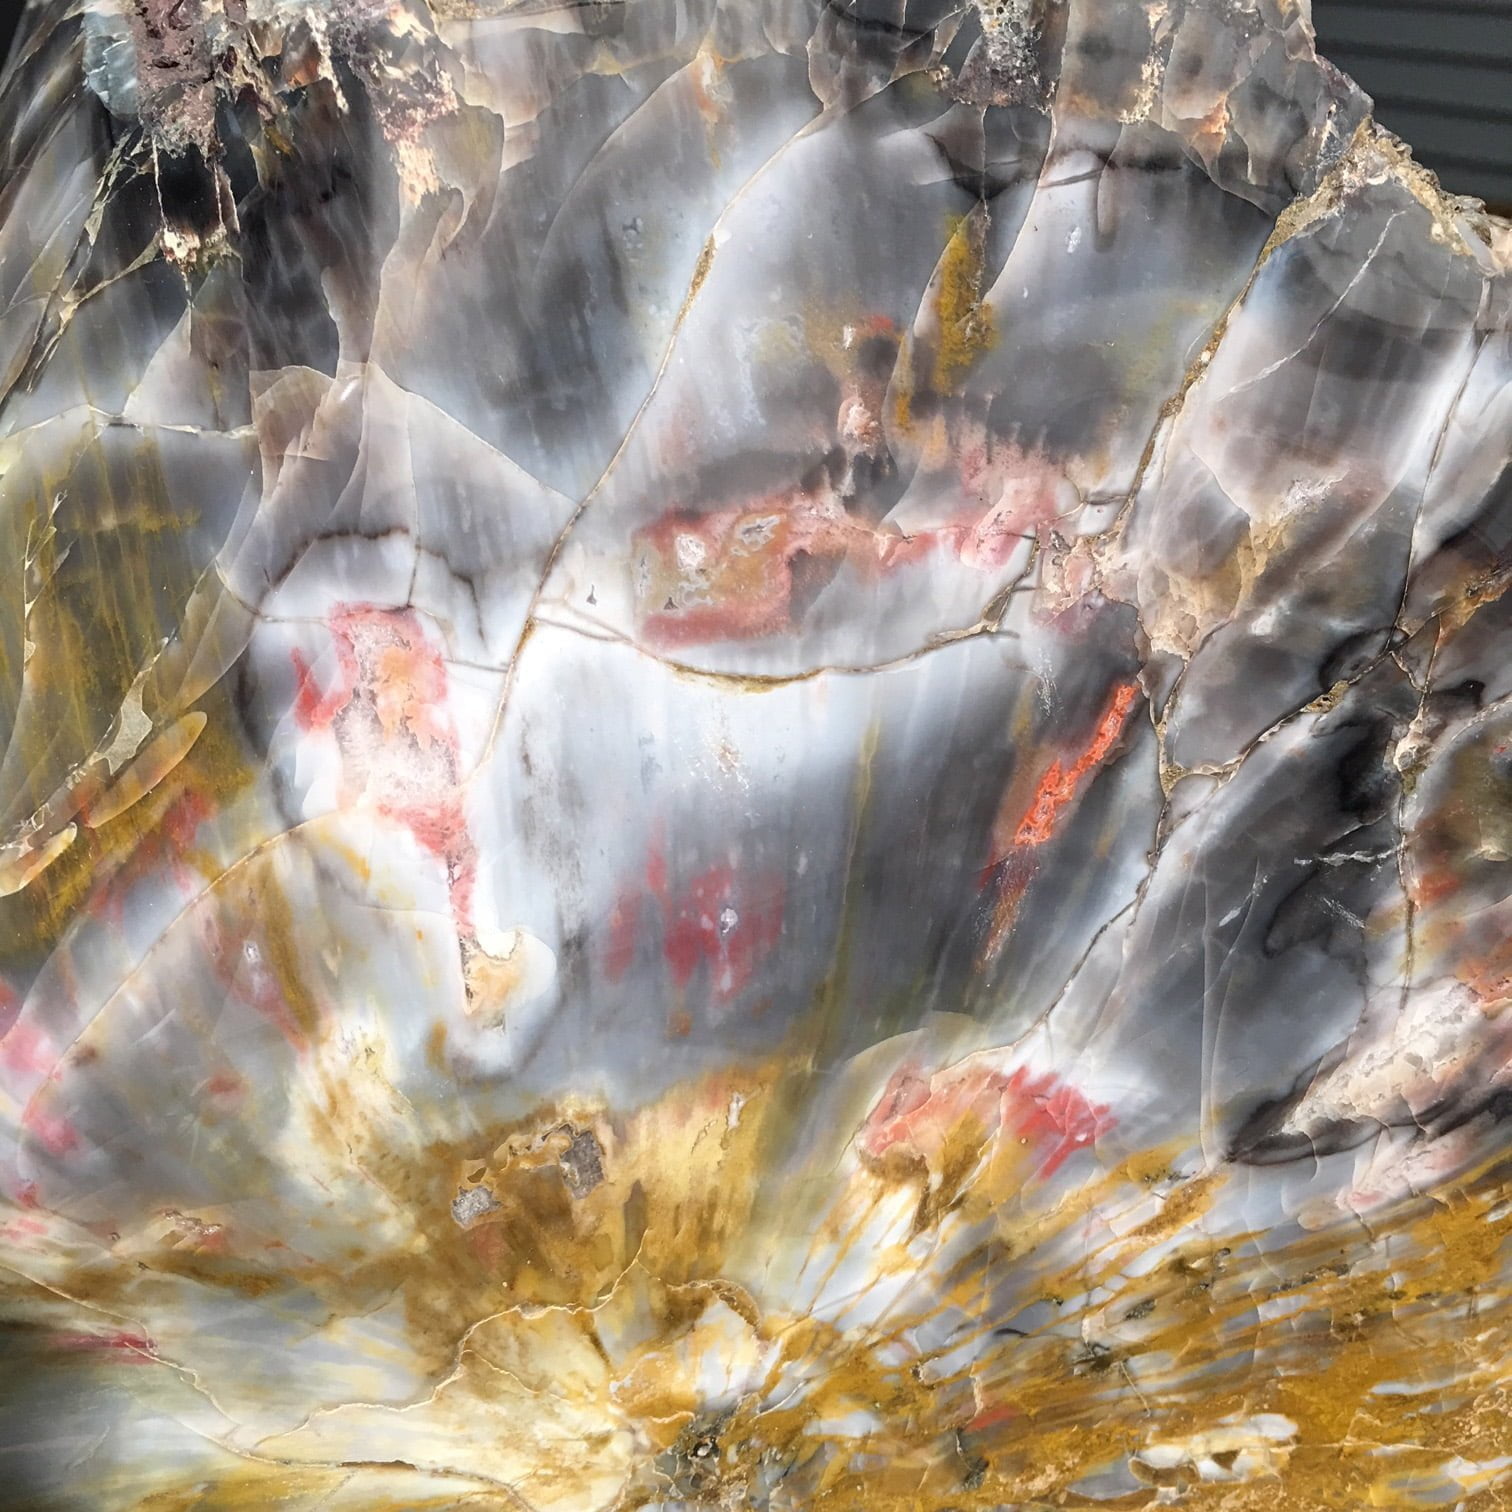 #A6 Museum Arizona Petrified Wood Sculpture Hand Polished With Yellow Starburst & Knot - 120 Lbs